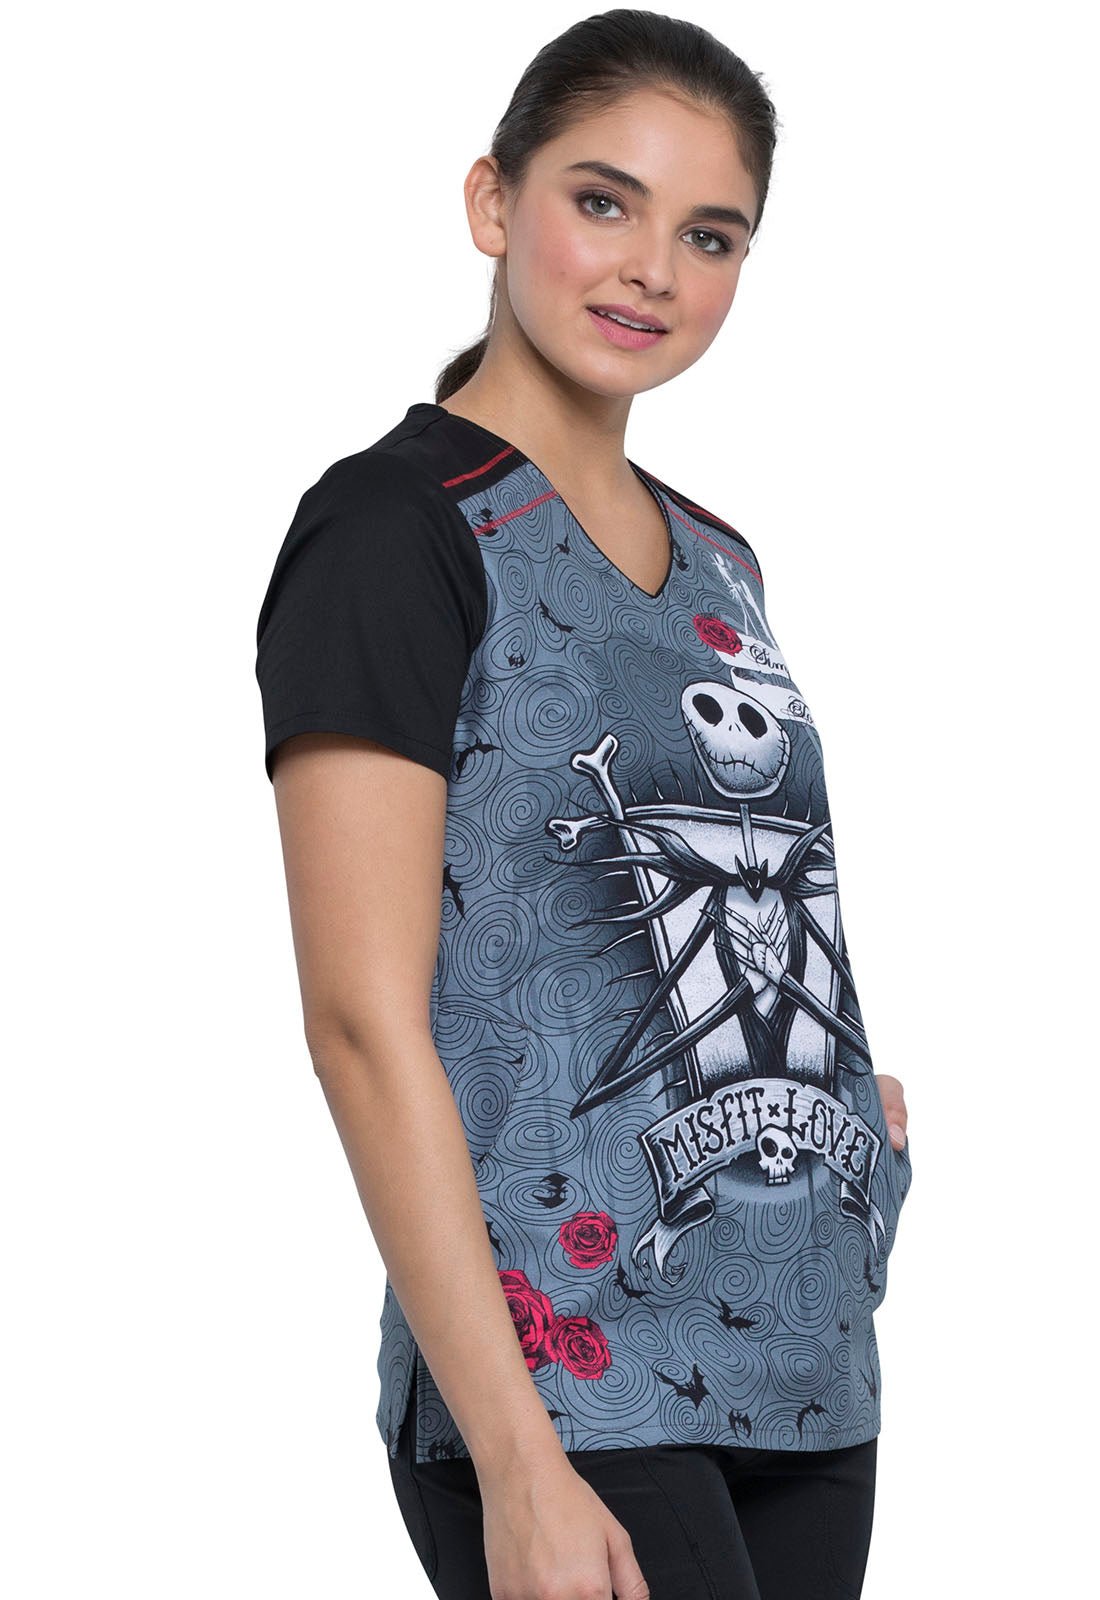 Nightmare Before Christmas Tooniforms Licensed V-Neck Scrub Top TF639 NCIF - Scrubs Select